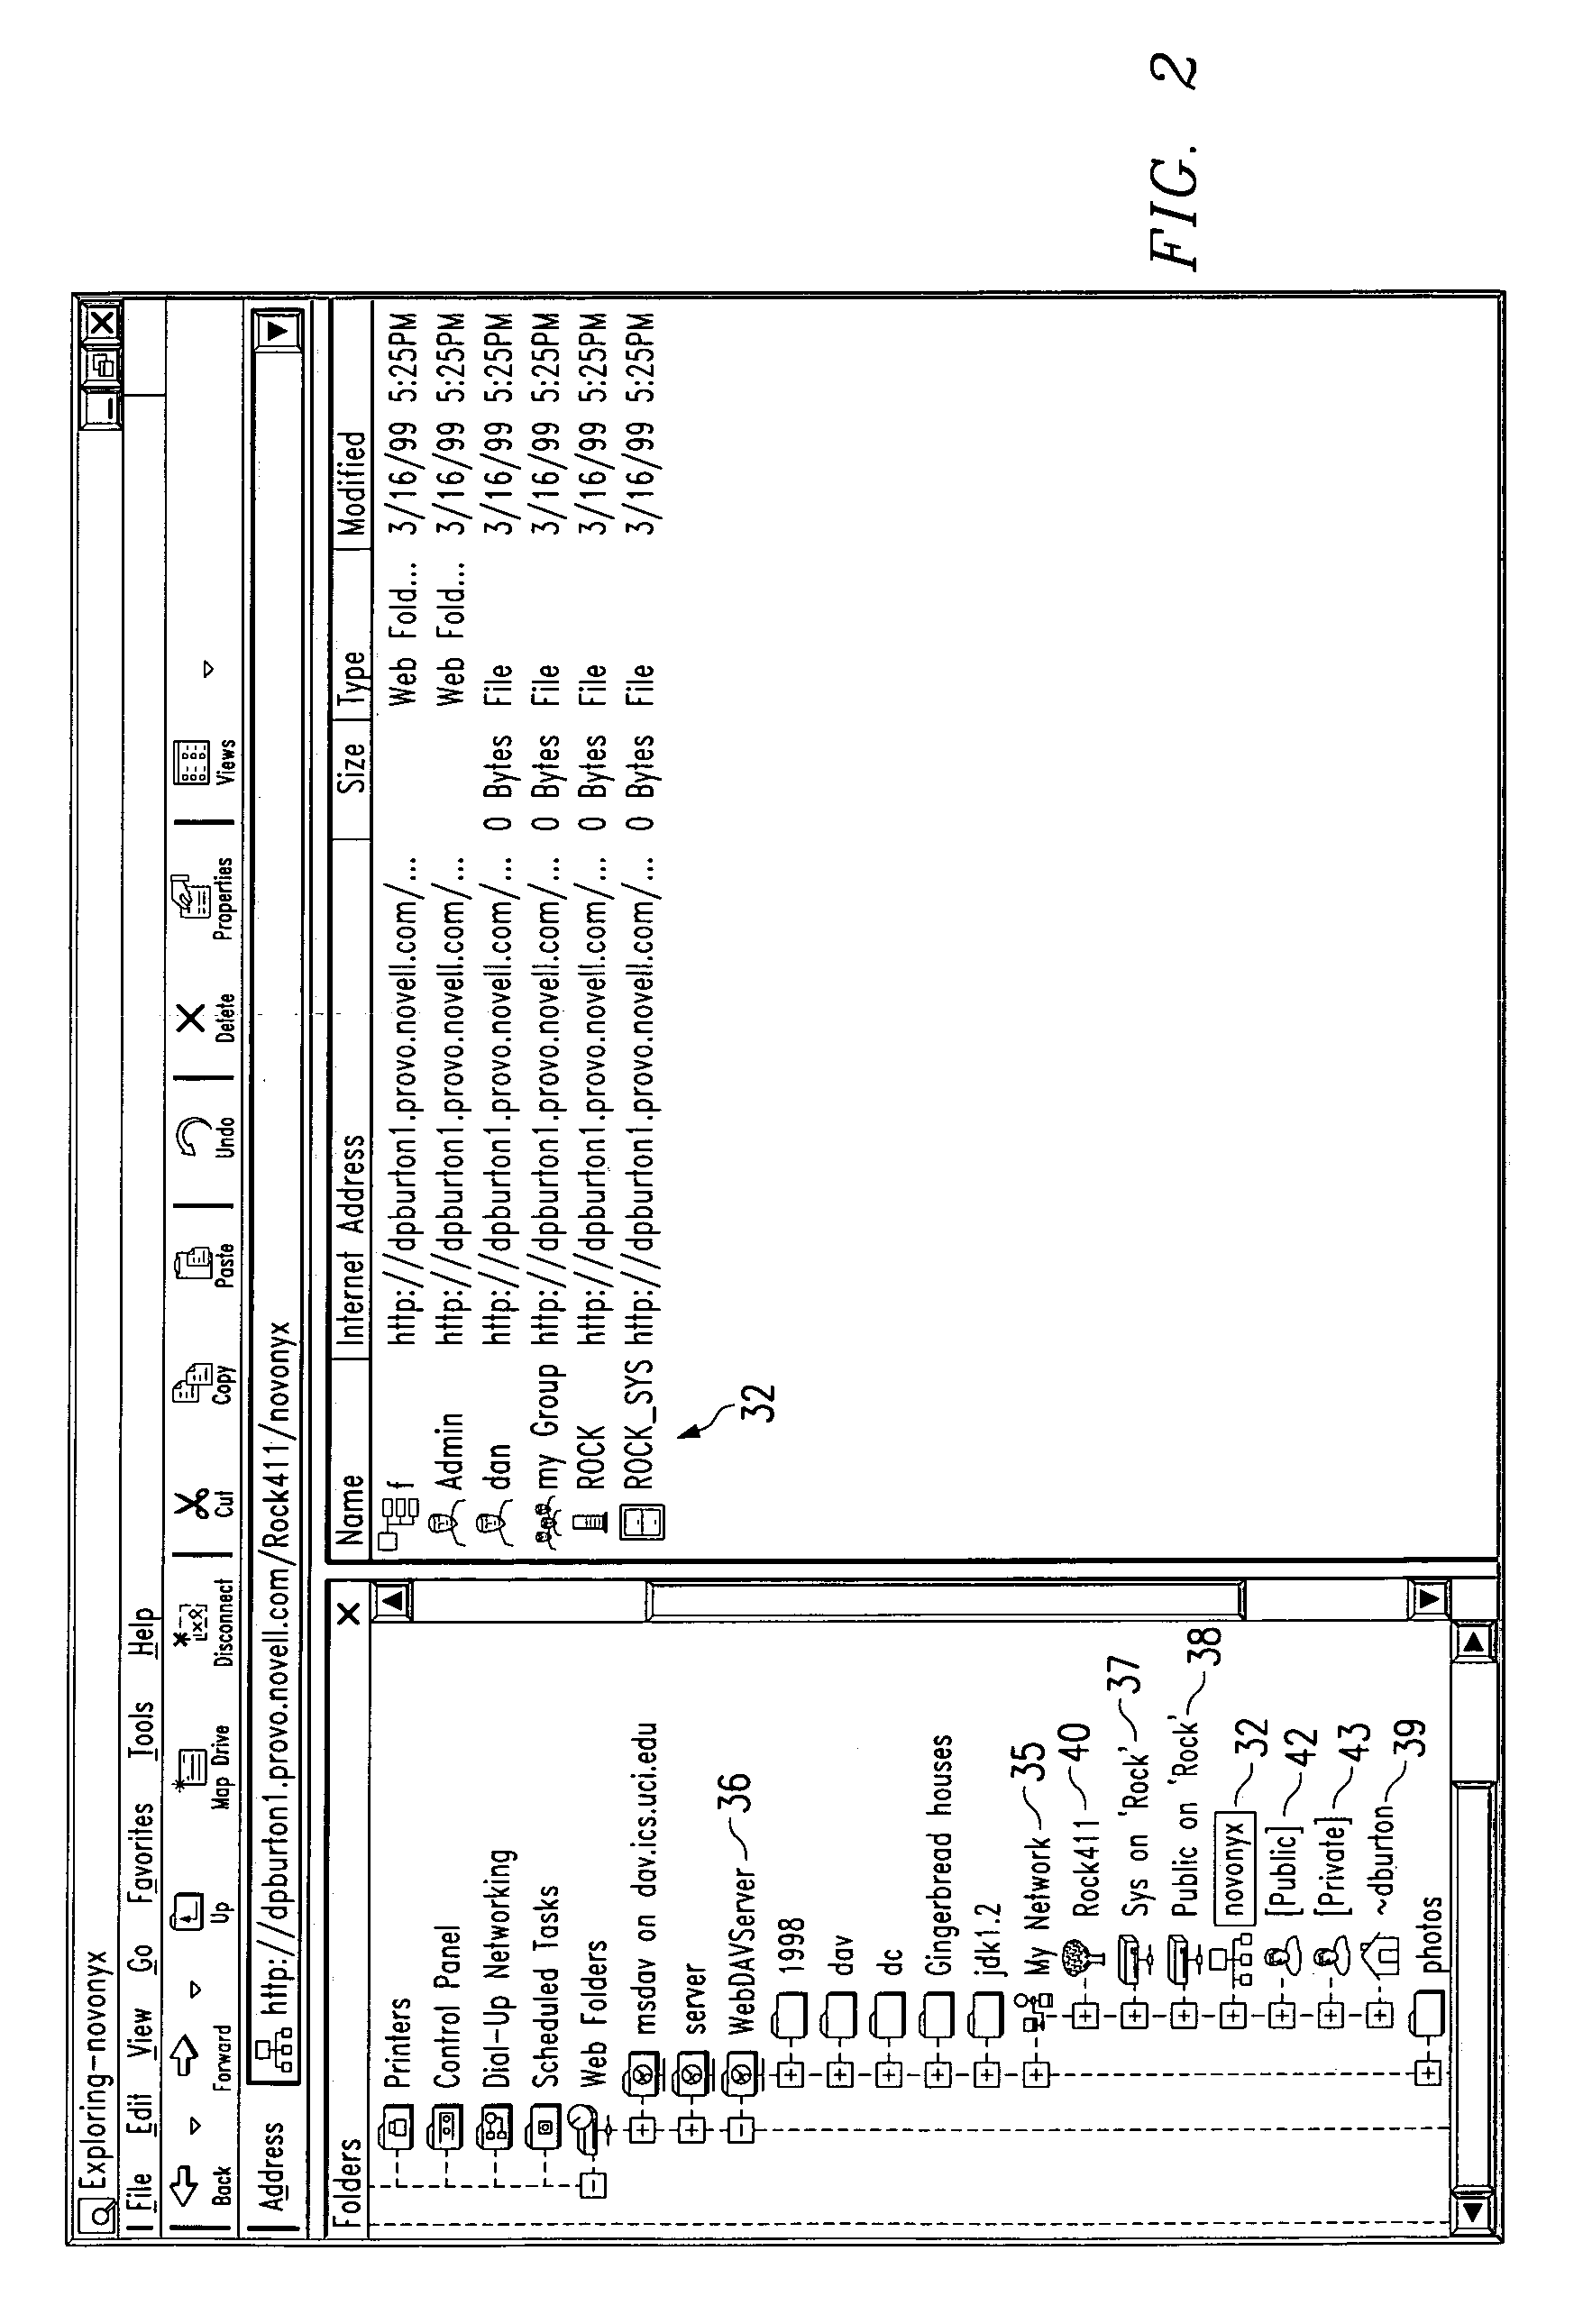 Method and apparatus for exposing network administration stored in a directory using HTTP/WebDAV protocol